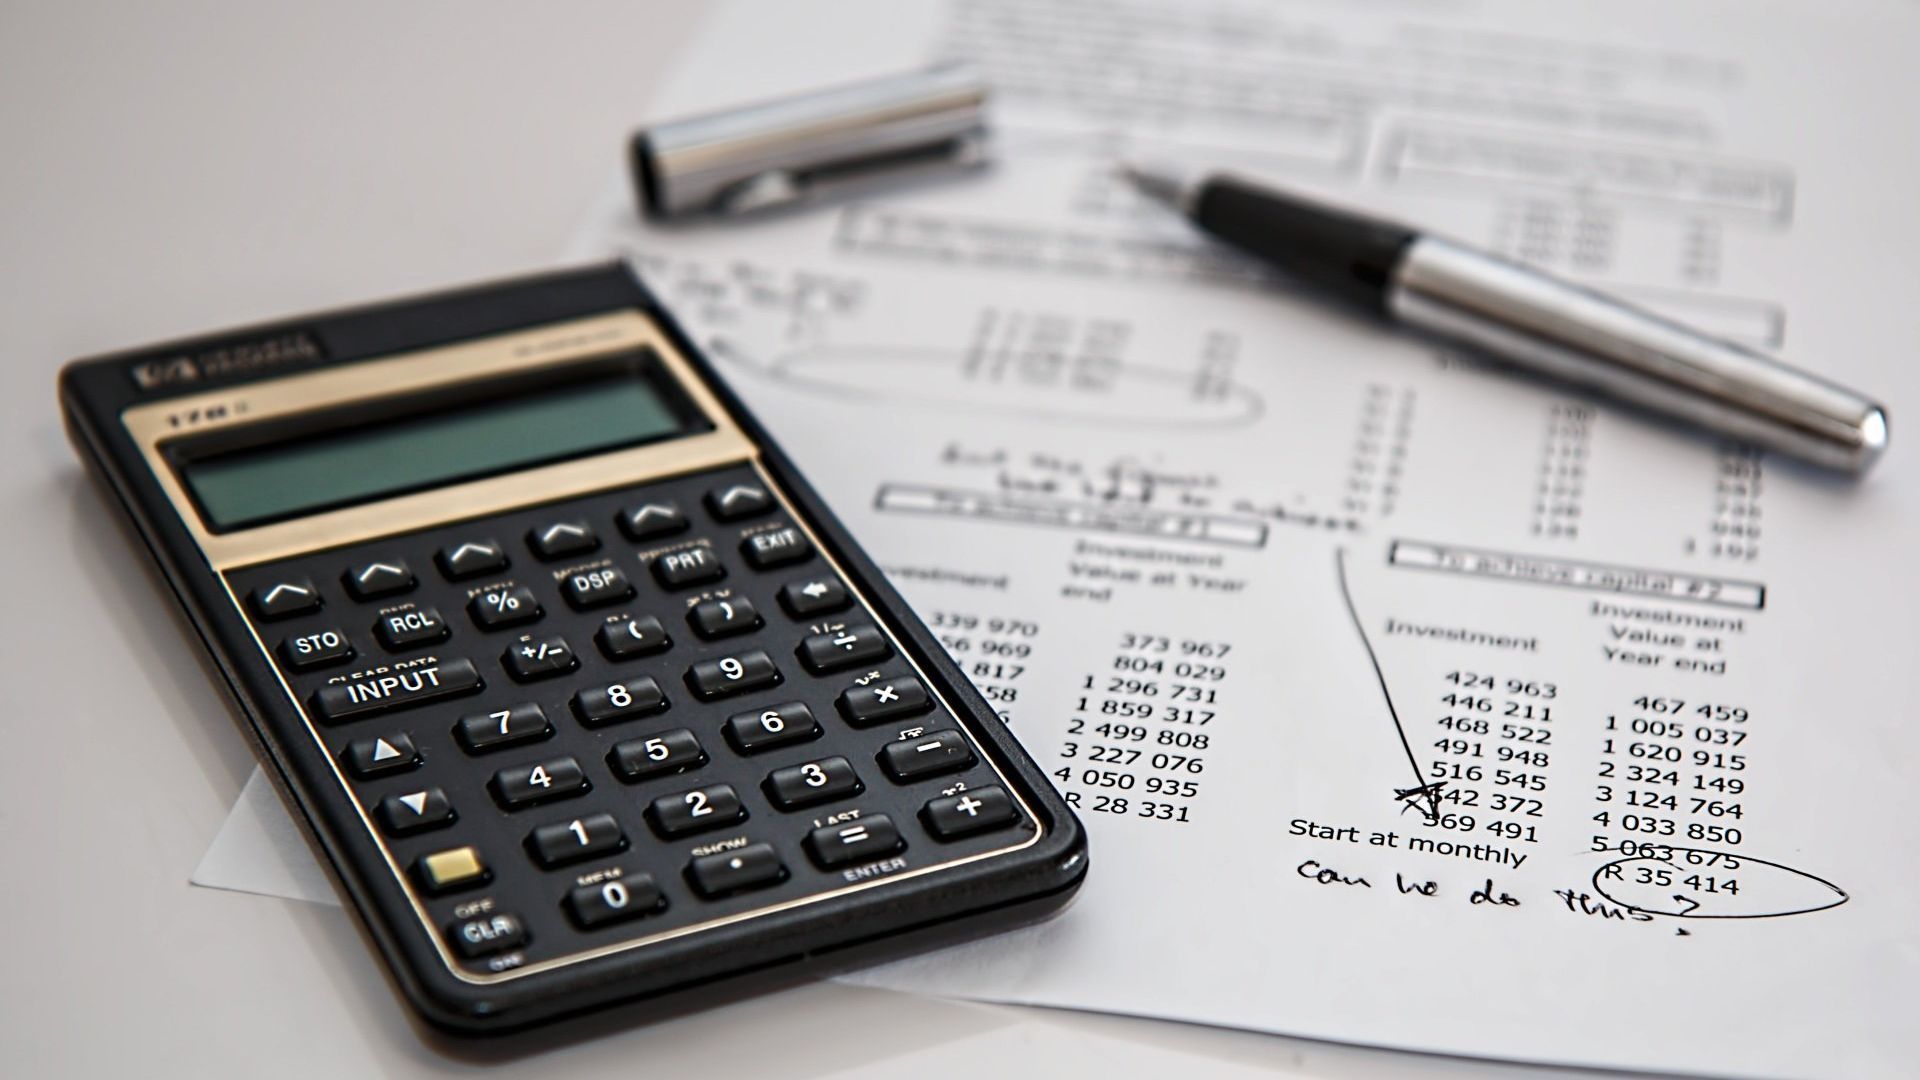 A calculator, a pen and financial documents on a desk showing calculations or budget planning for a guarantee for property under construction in Italy.